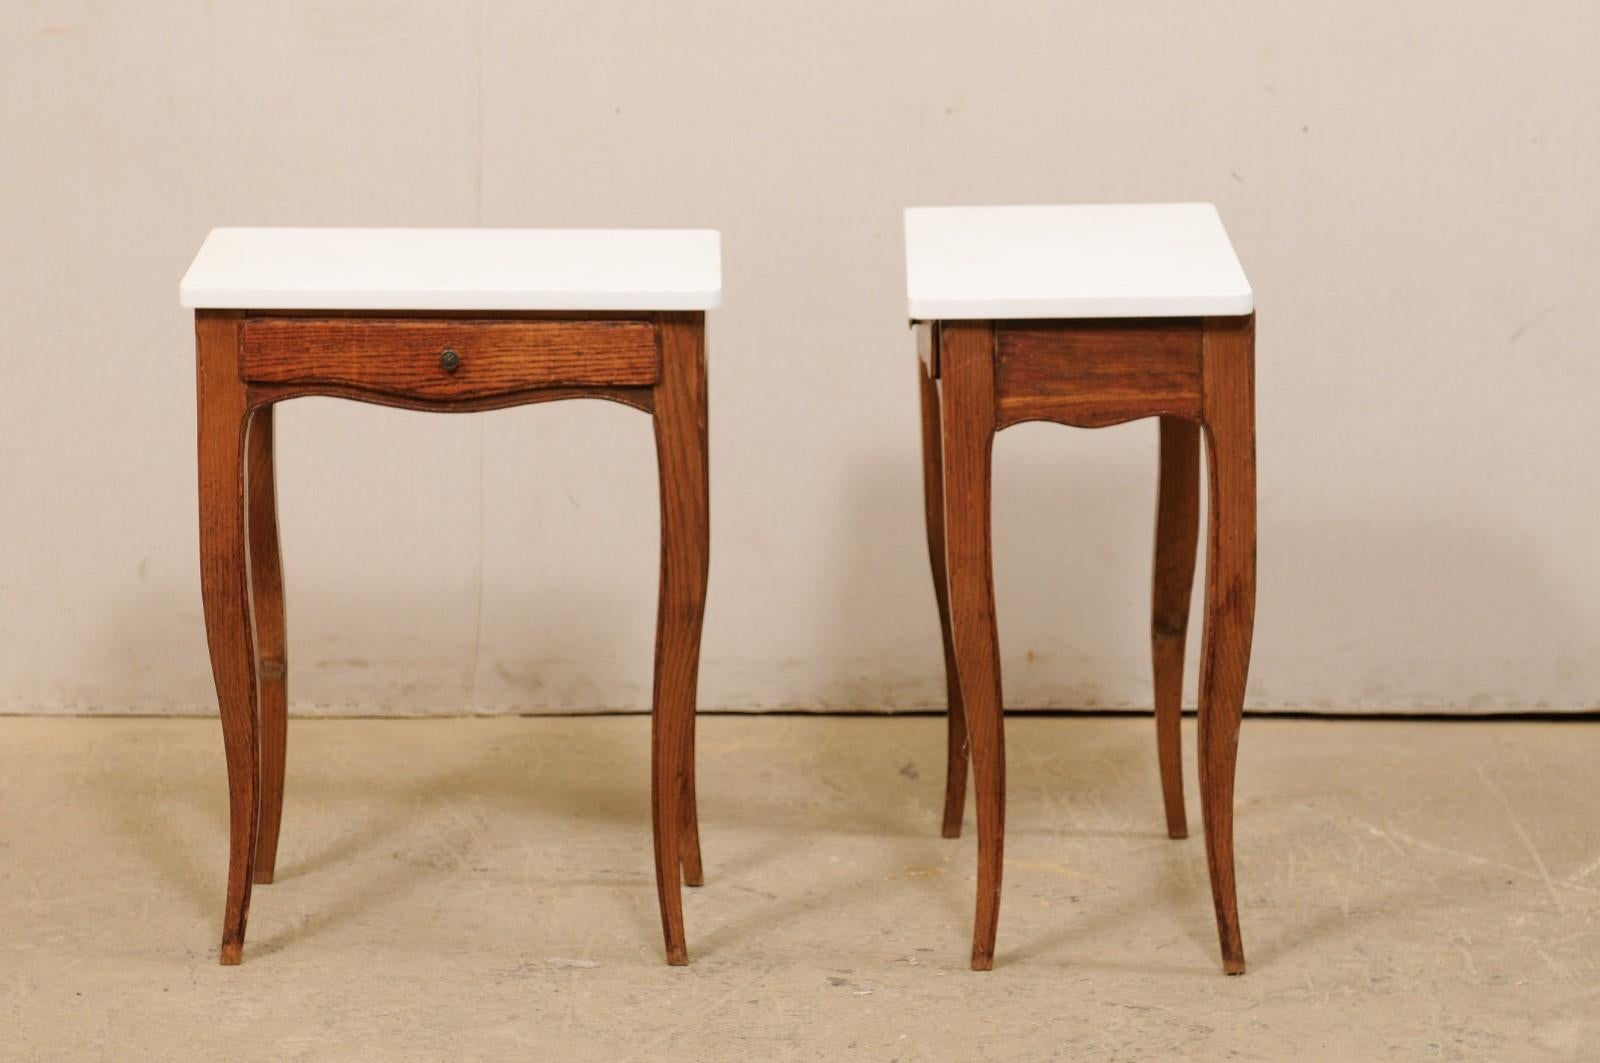 Pair of 1920s French Single-Drawer Side Tables with New White Quartz Tops For Sale 5